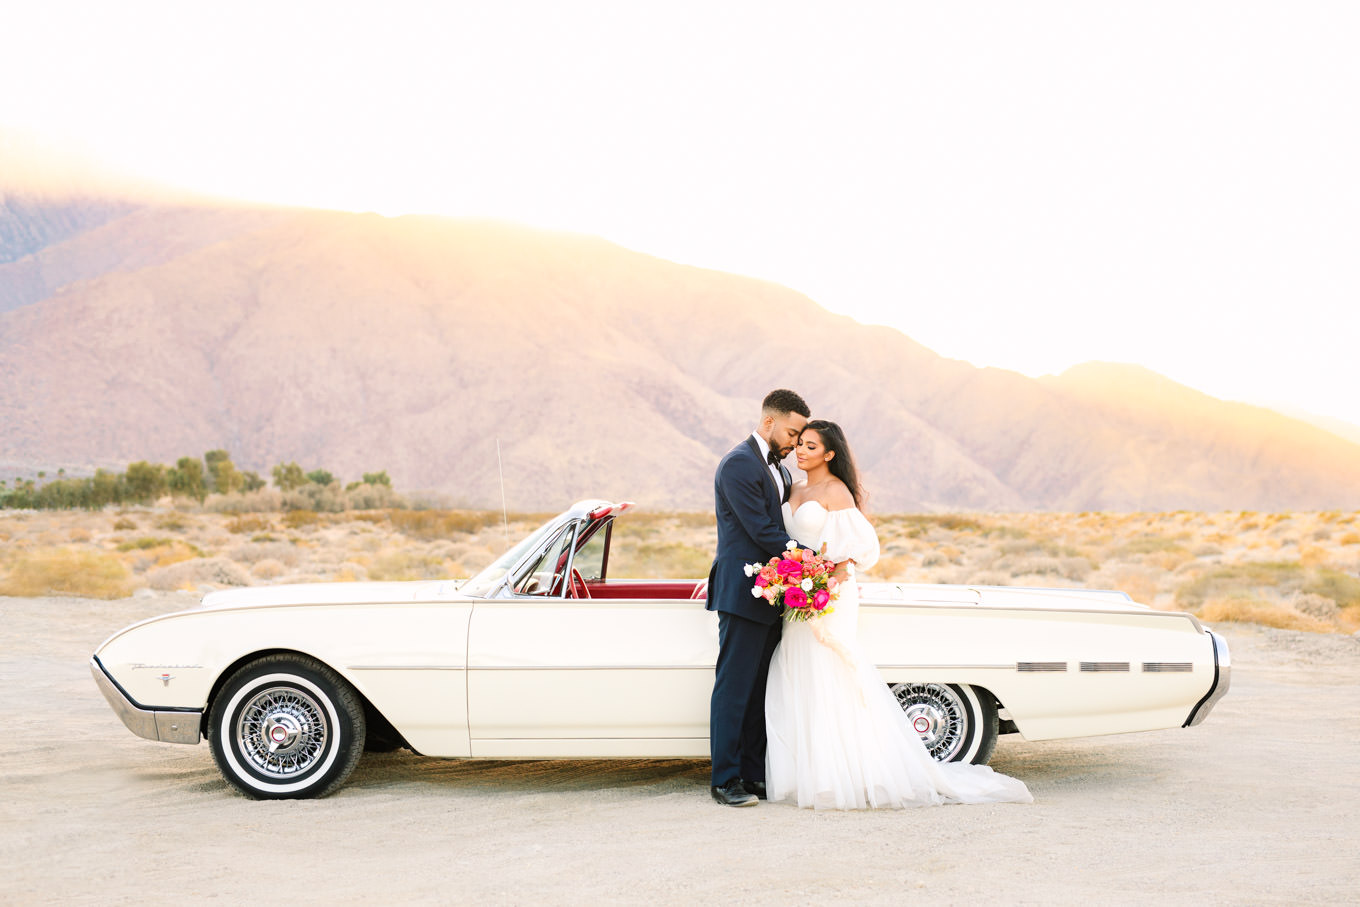 Palm Springs elopement with classic car | Engagement, elopement, and wedding photography roundup of Mary Costa’s favorite images from 2020 | Colorful and elevated photography for fun-loving couples in Southern California | #2020wedding #elopement #weddingphoto #weddingphotography #microwedding   Source: Mary Costa Photography | Los Angeles